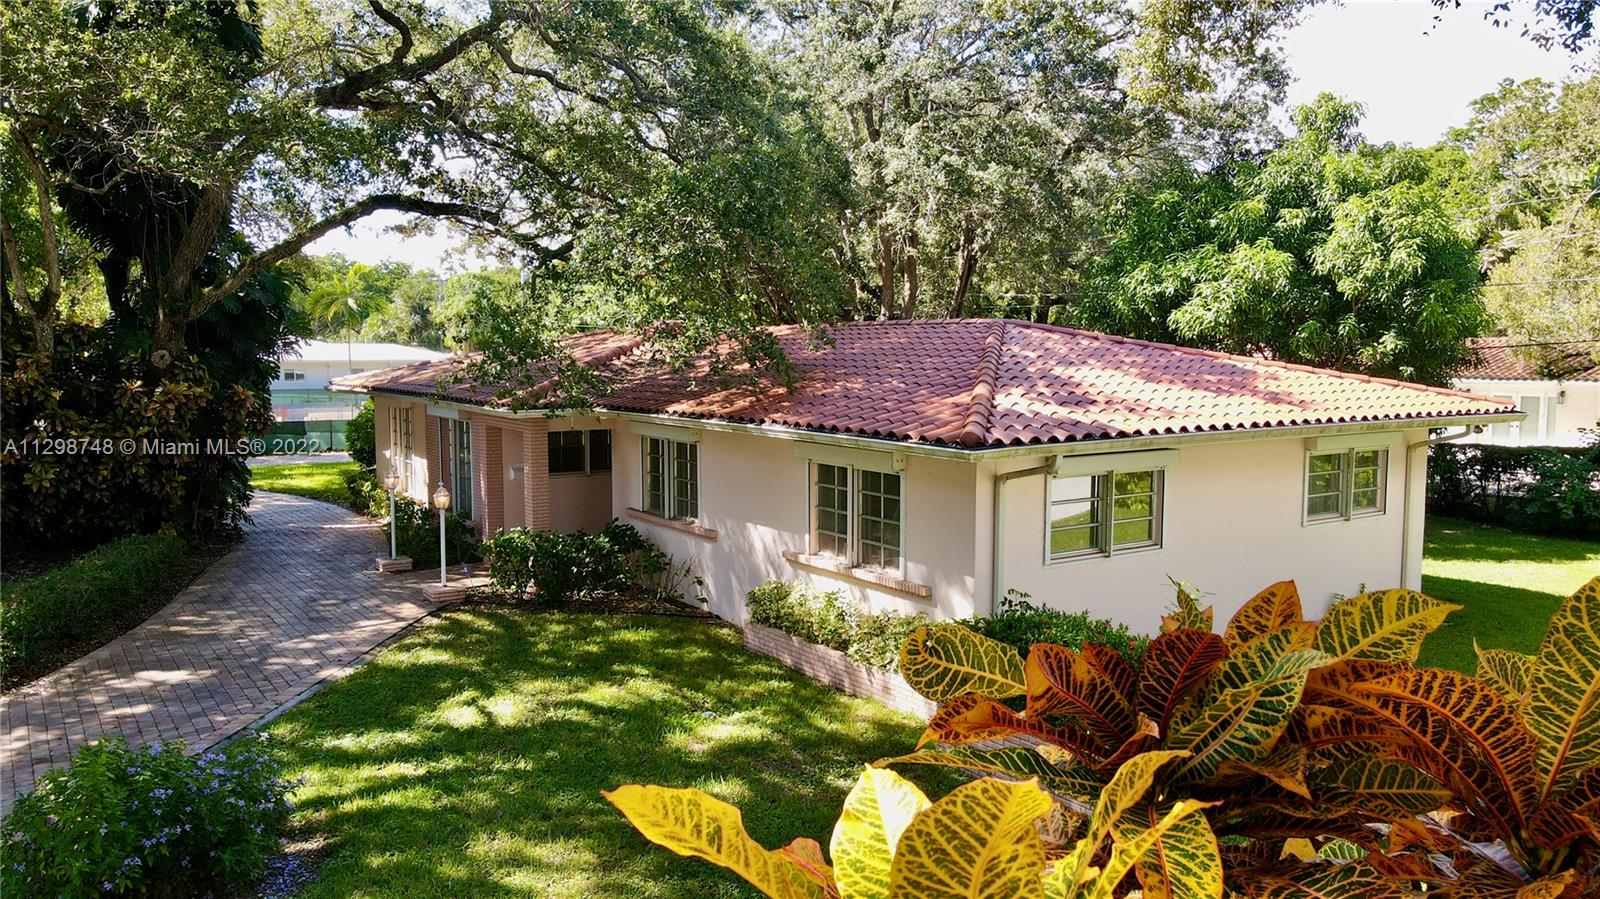 Amazing oversized lot on a tree-lined street in a quiet area of Coral Gables. Build your dream home or renovate the existing 3 bedroom, 3 bath home. Great neighborhood close to UM, dining, shopping, and so much more! Additional photos coming soon.